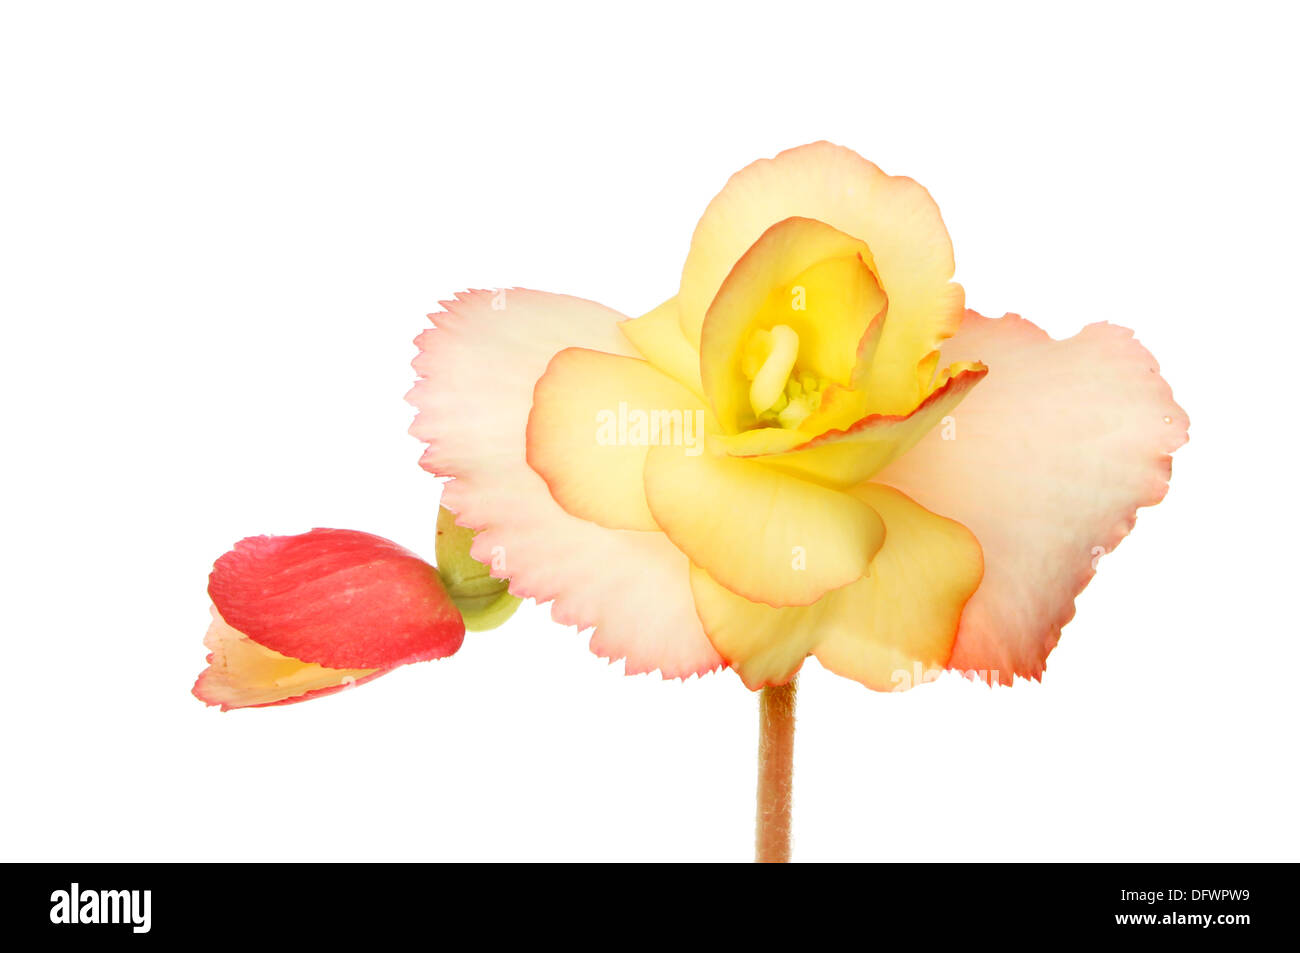 Pastel yellow and peach colored begonia flower isolated against white Stock Photo